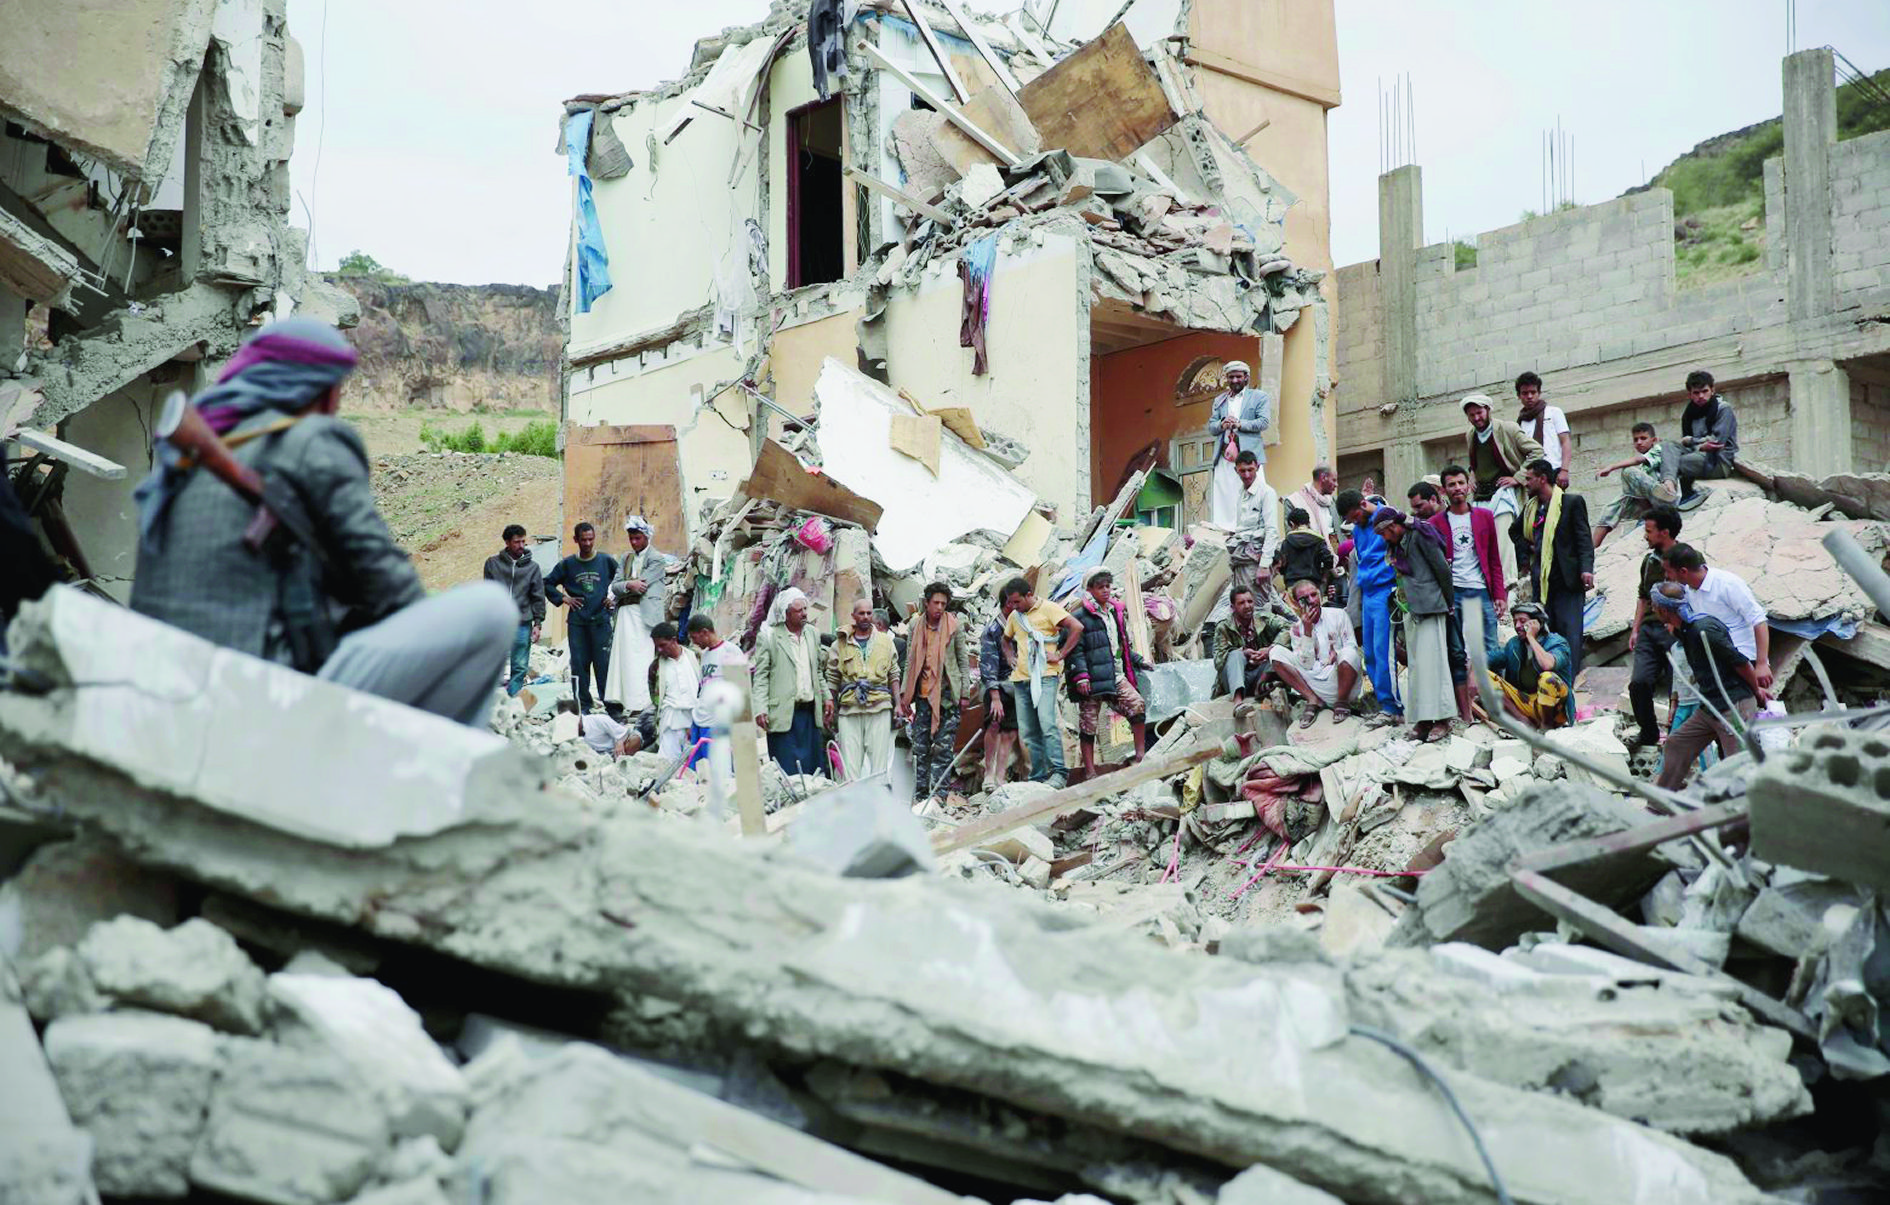 FILE - In this Aug. 25, 2017 file photo, People inspect the rubble of houses destroyed by Saudi-led airstrikes in Sanaa, Yemen. The Monday, Sept. 25, 2017, Kurdish independence referendum in Iraq is the latest in a series of¬moves toward formal secession or de facto fragmentation caused by conflict, race or religion in the Middle East. ItÄôs a trend viewed with considerable alarm in a region that had seriously flirted with merging its nations in post-colonial years more than a half century ago. (AP Photo/Hani Mohammed, File) Iraq Regional Breakups